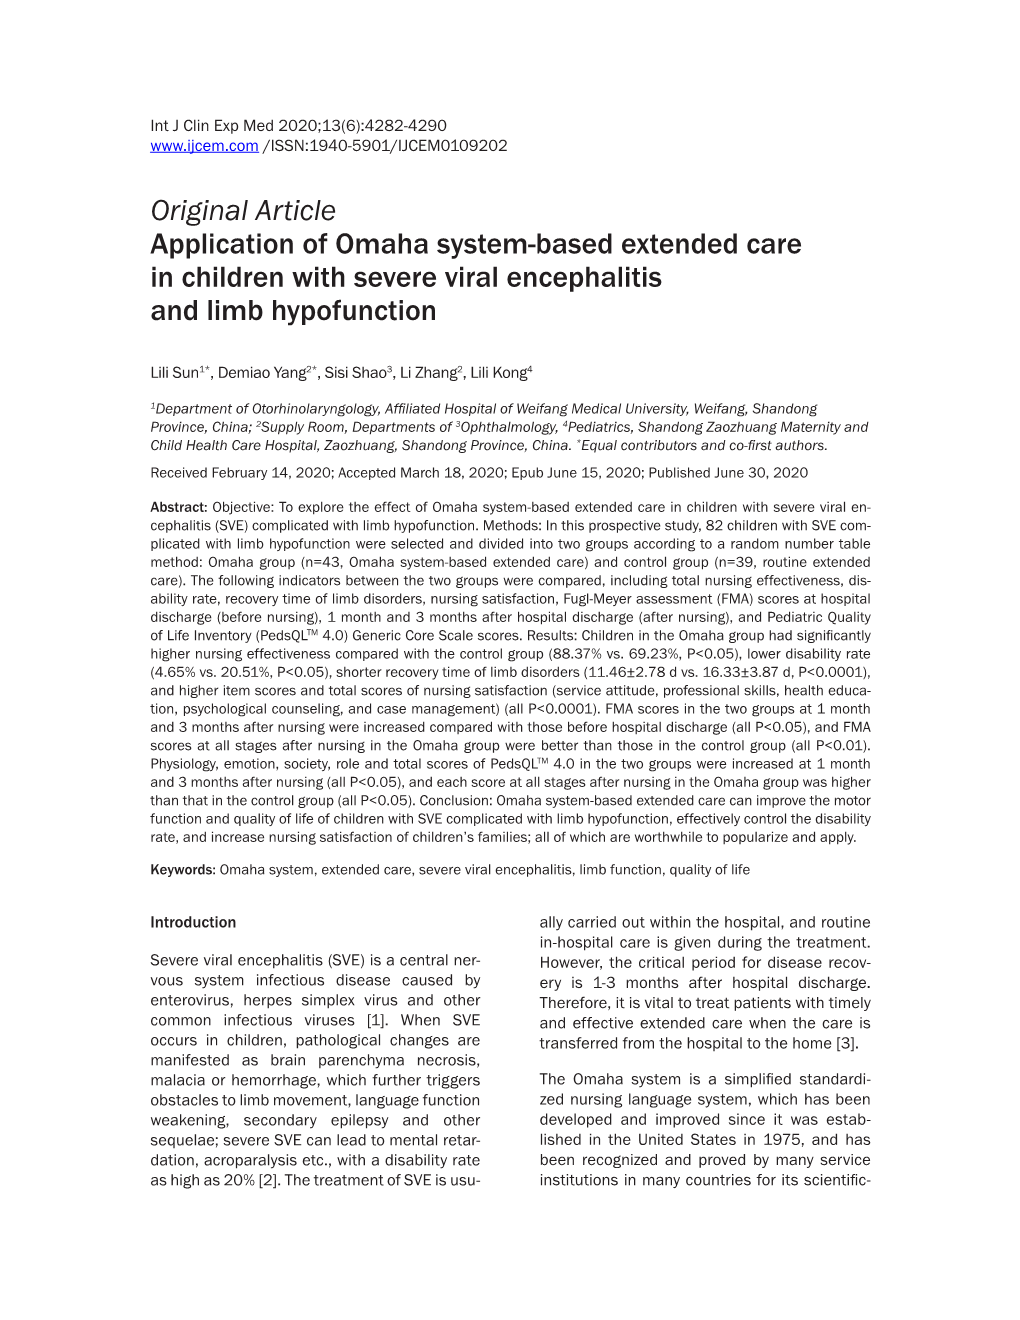 Original Article Application of Omaha System-Based Extended Care in Children with Severe Viral Encephalitis and Limb Hypofunction